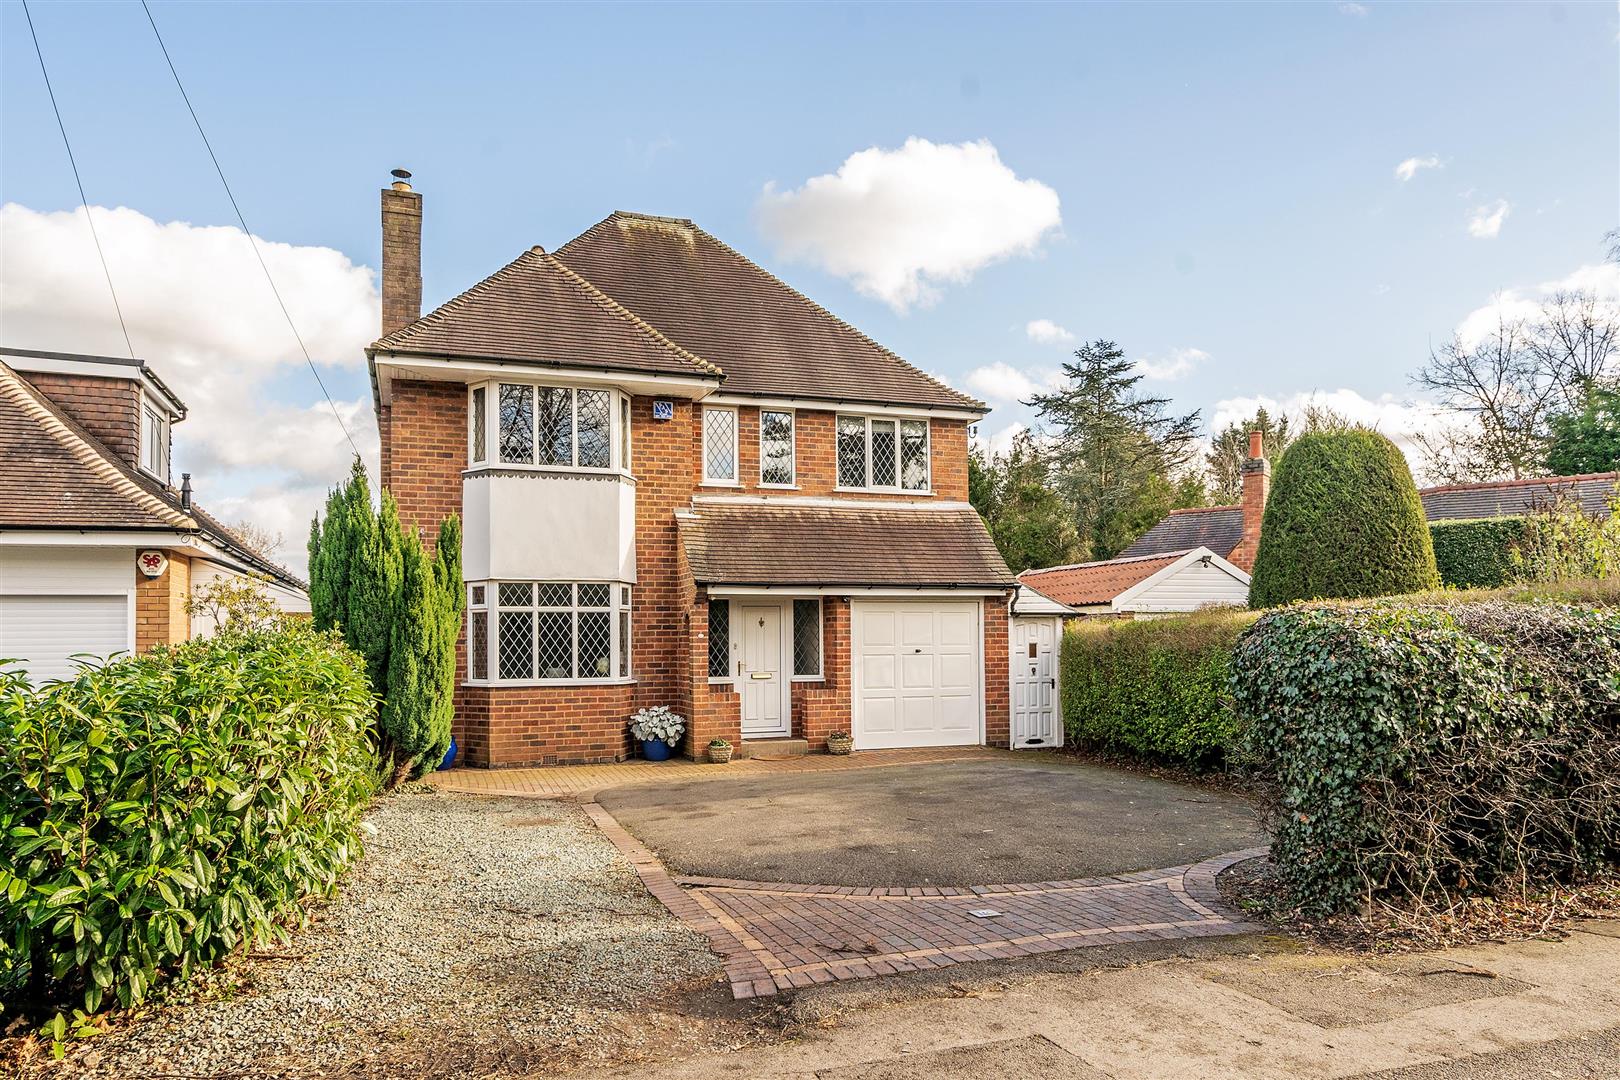 4 bed detached house for sale in Tilehouse Green Lane, Knowle  - Property Image 1